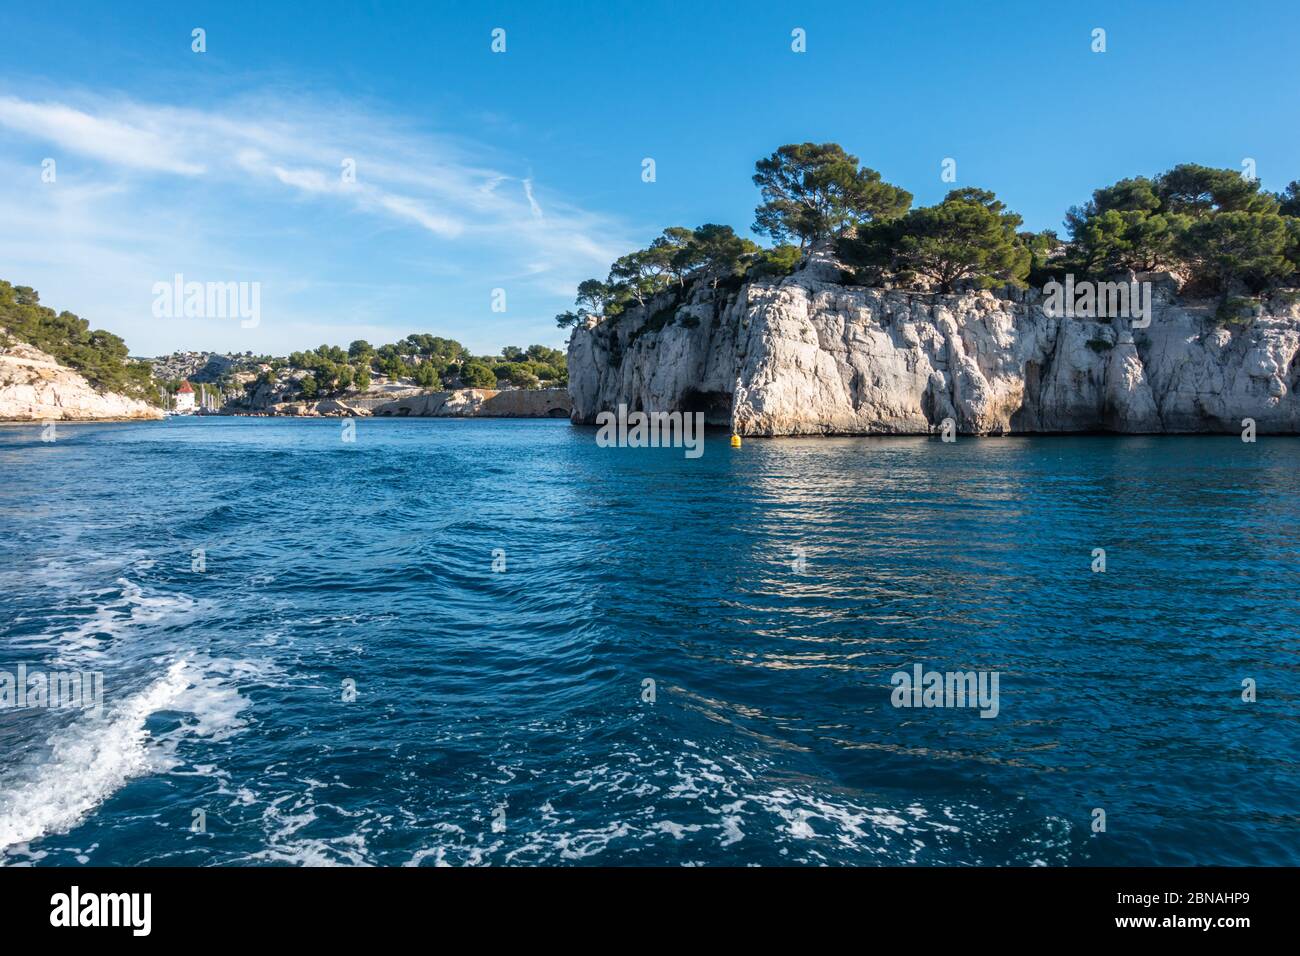 Boat trip along the coast of the Calanques National Park near Cassis, France Stock Photo